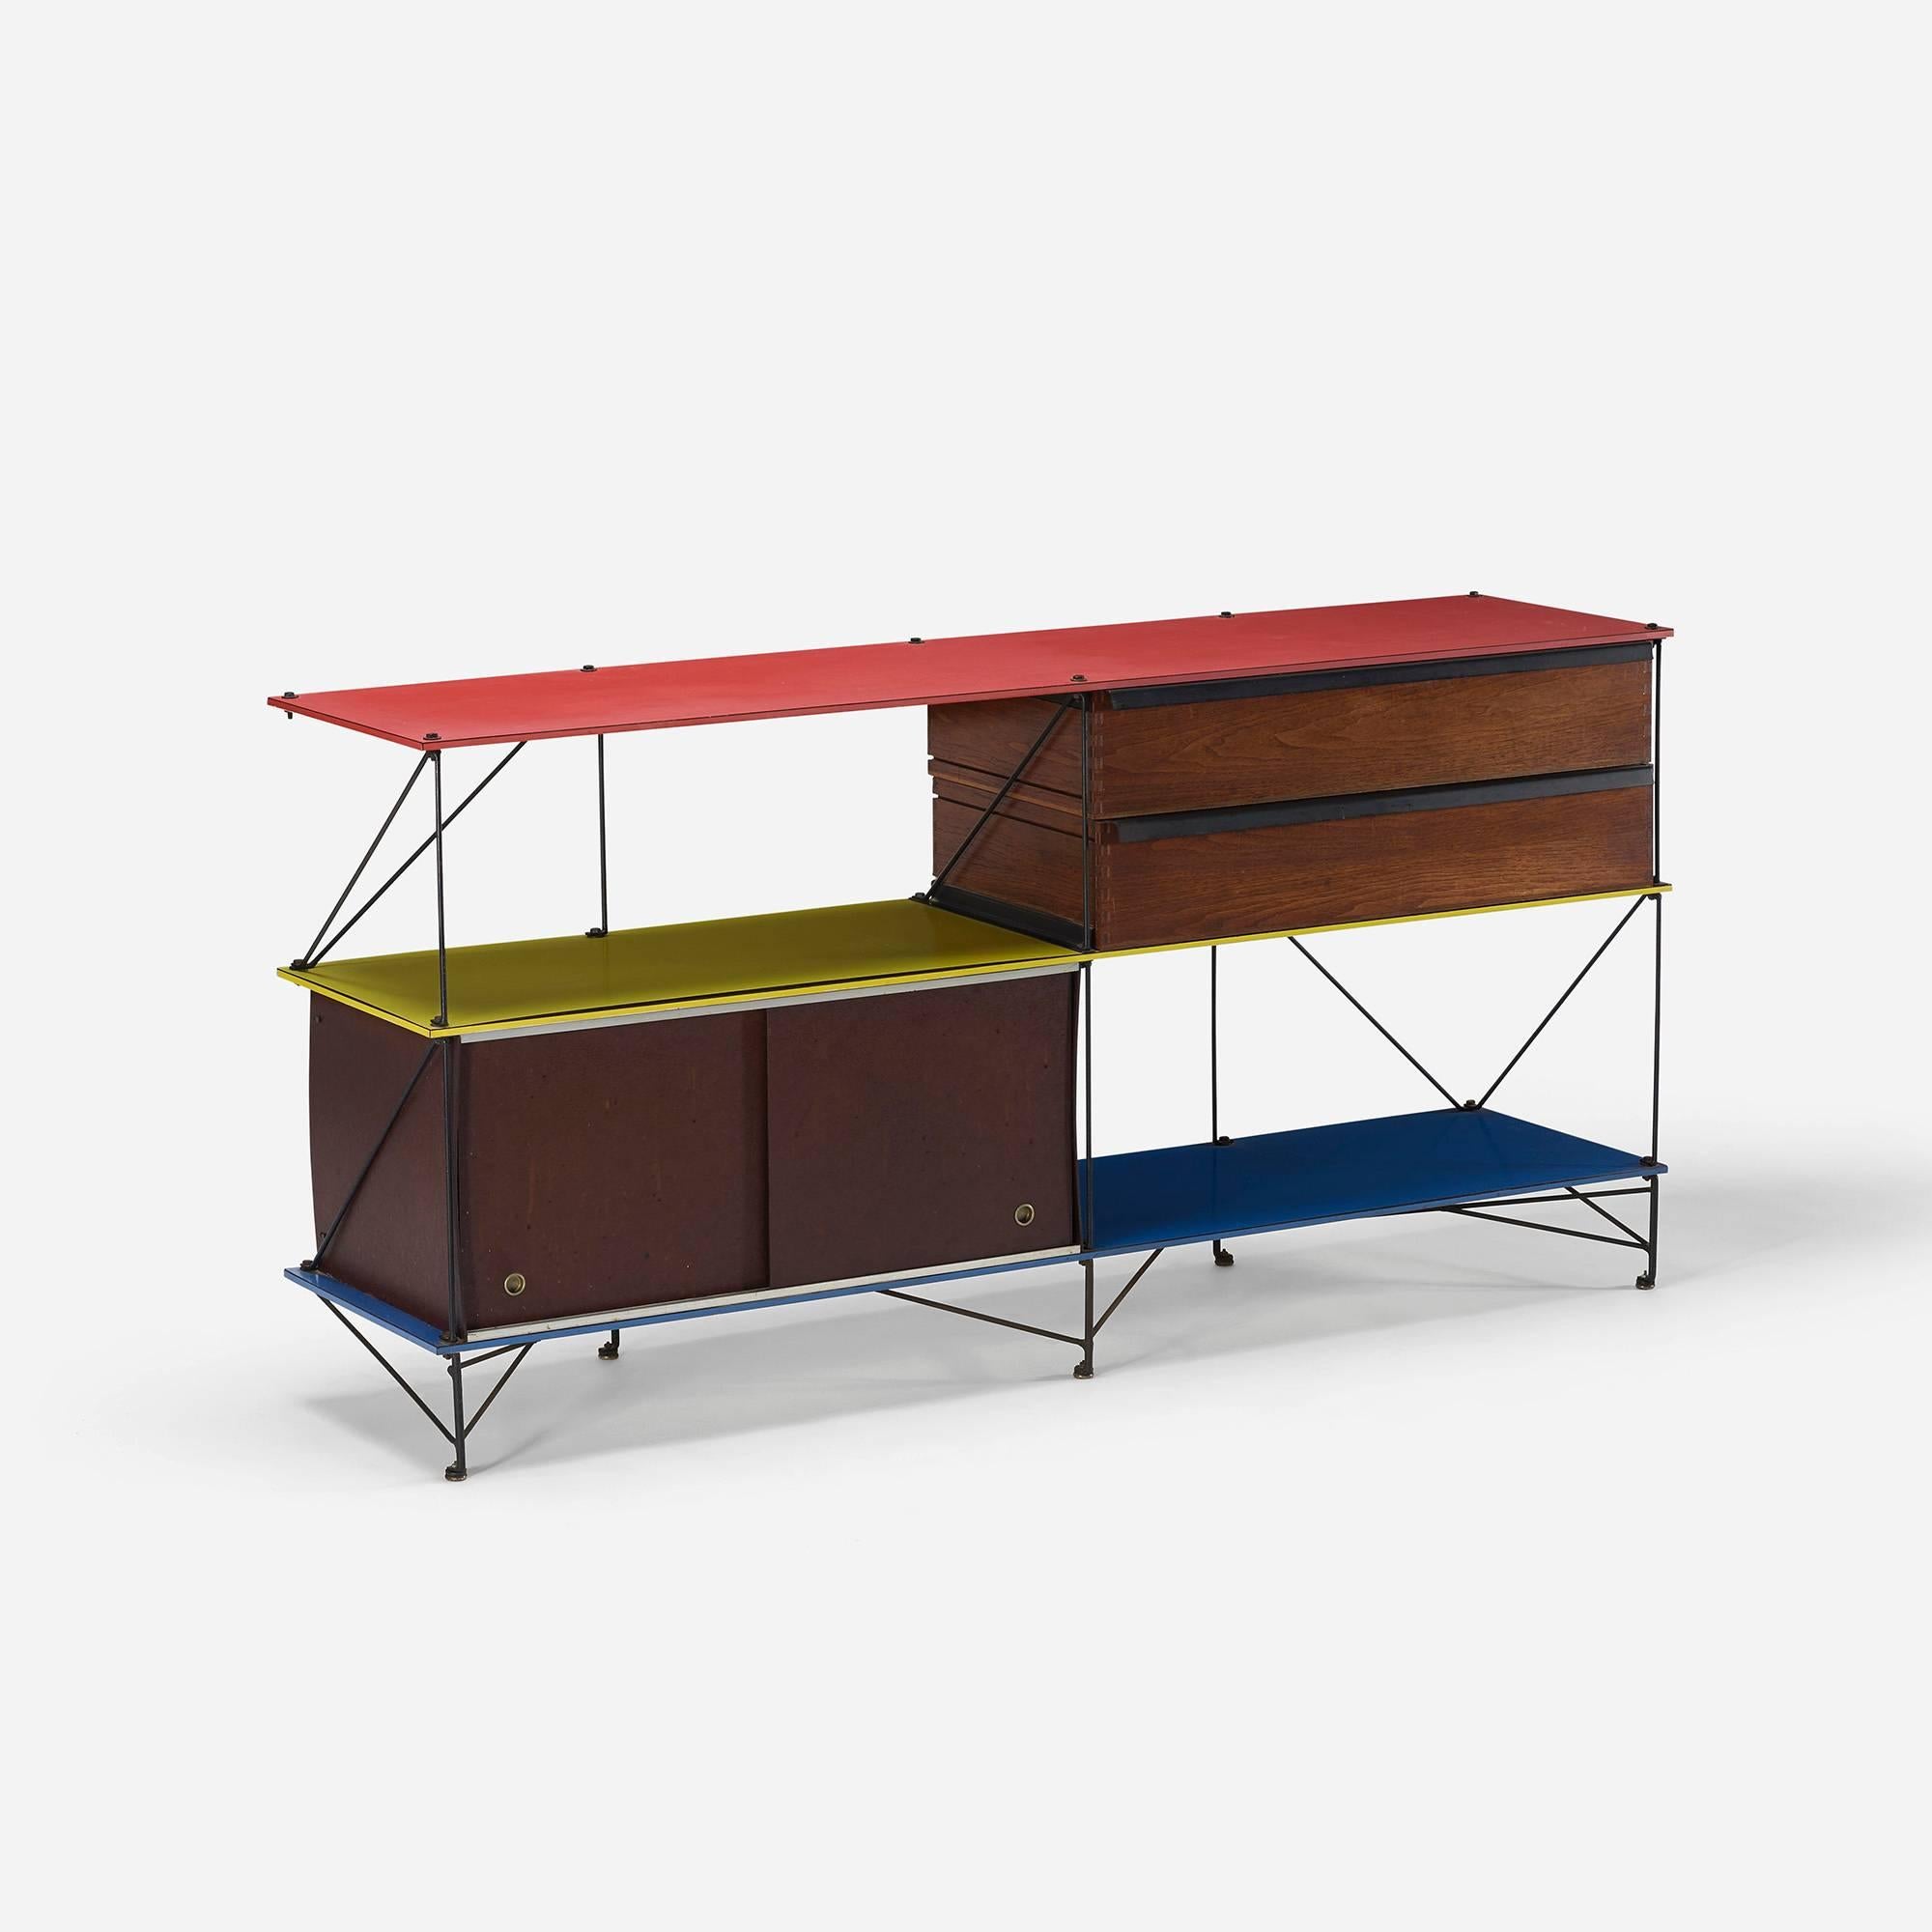 Cabinet features two drawers and two sliding doors concealing storage.

Created by a student of Chicago's Institute of Design, this storage cabinet epitomizes the constructivist and neo-plastic principles of the school's director, Laszlo